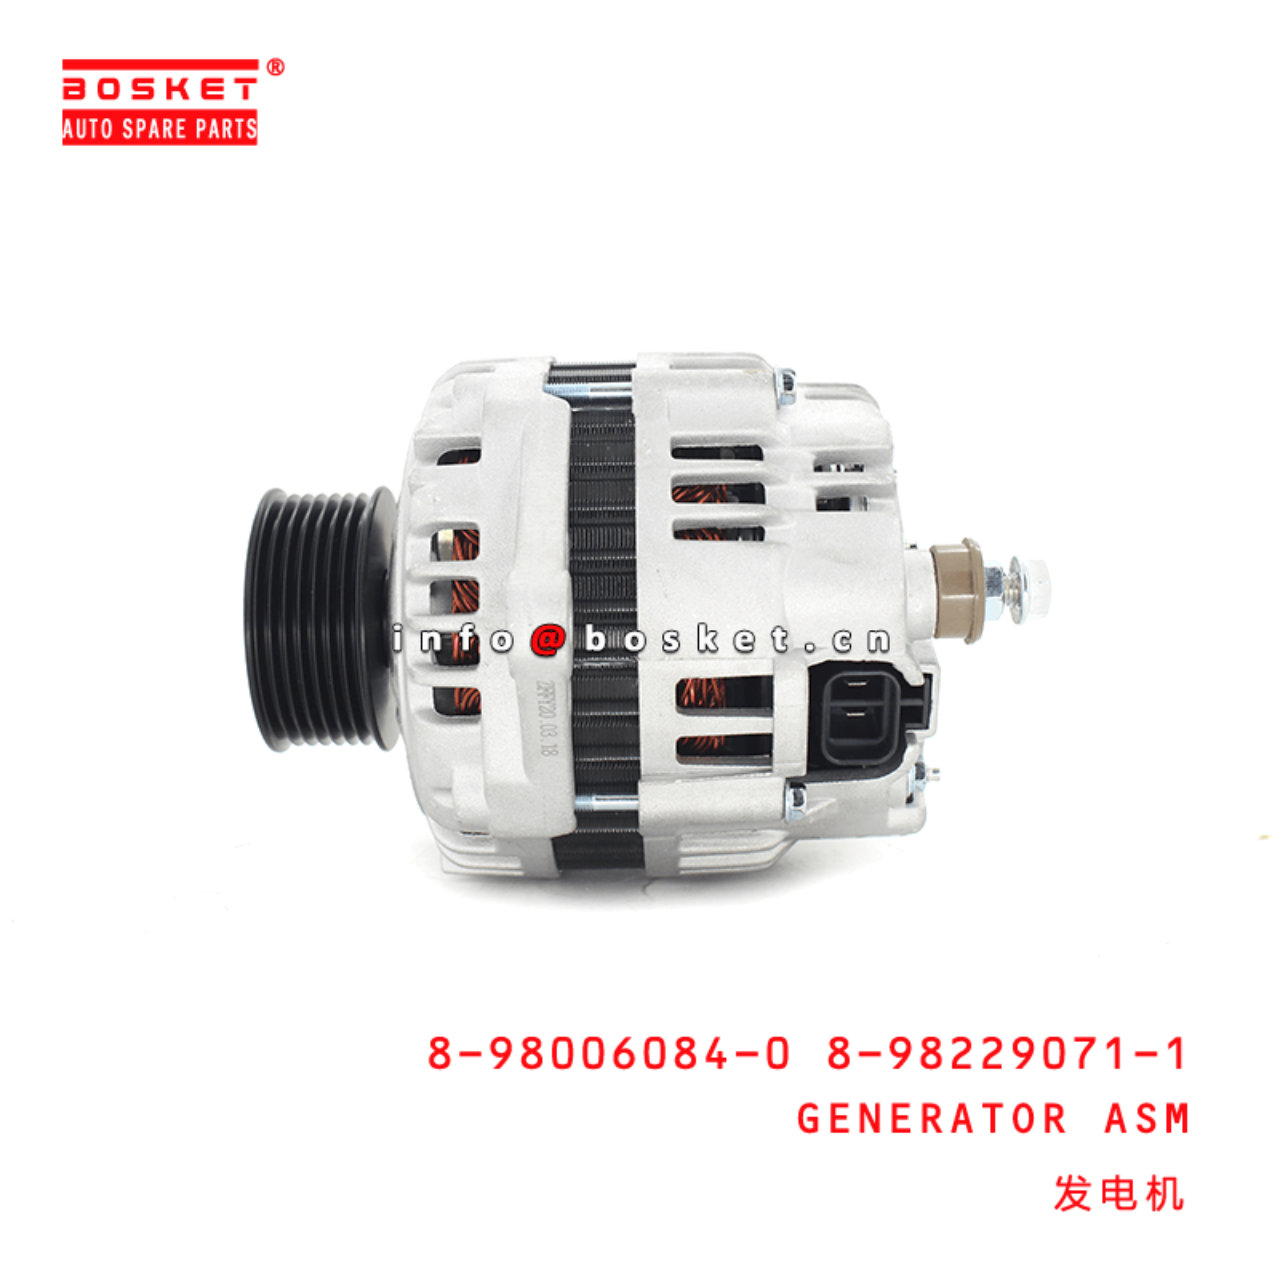 8-98006084-0 8-98229071-1 Generator Assembly 12V 90A 8980060840 8982290711 Suitable for ISUZU TFS TF